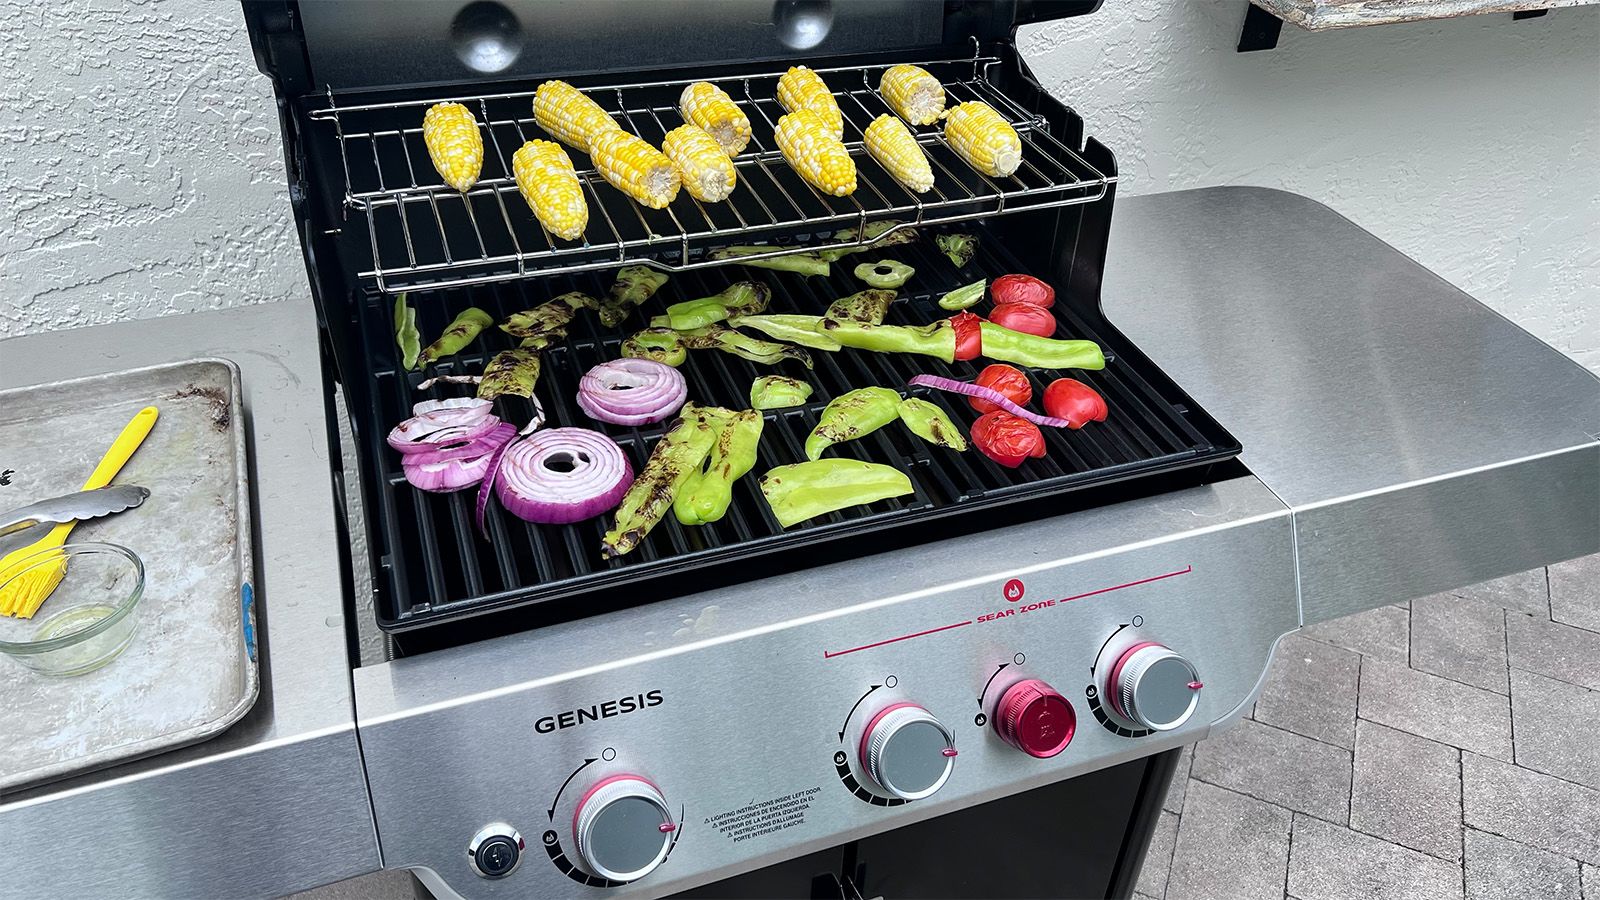 Are Electric Grills Any Good? Read Our Pros & Cons Guide